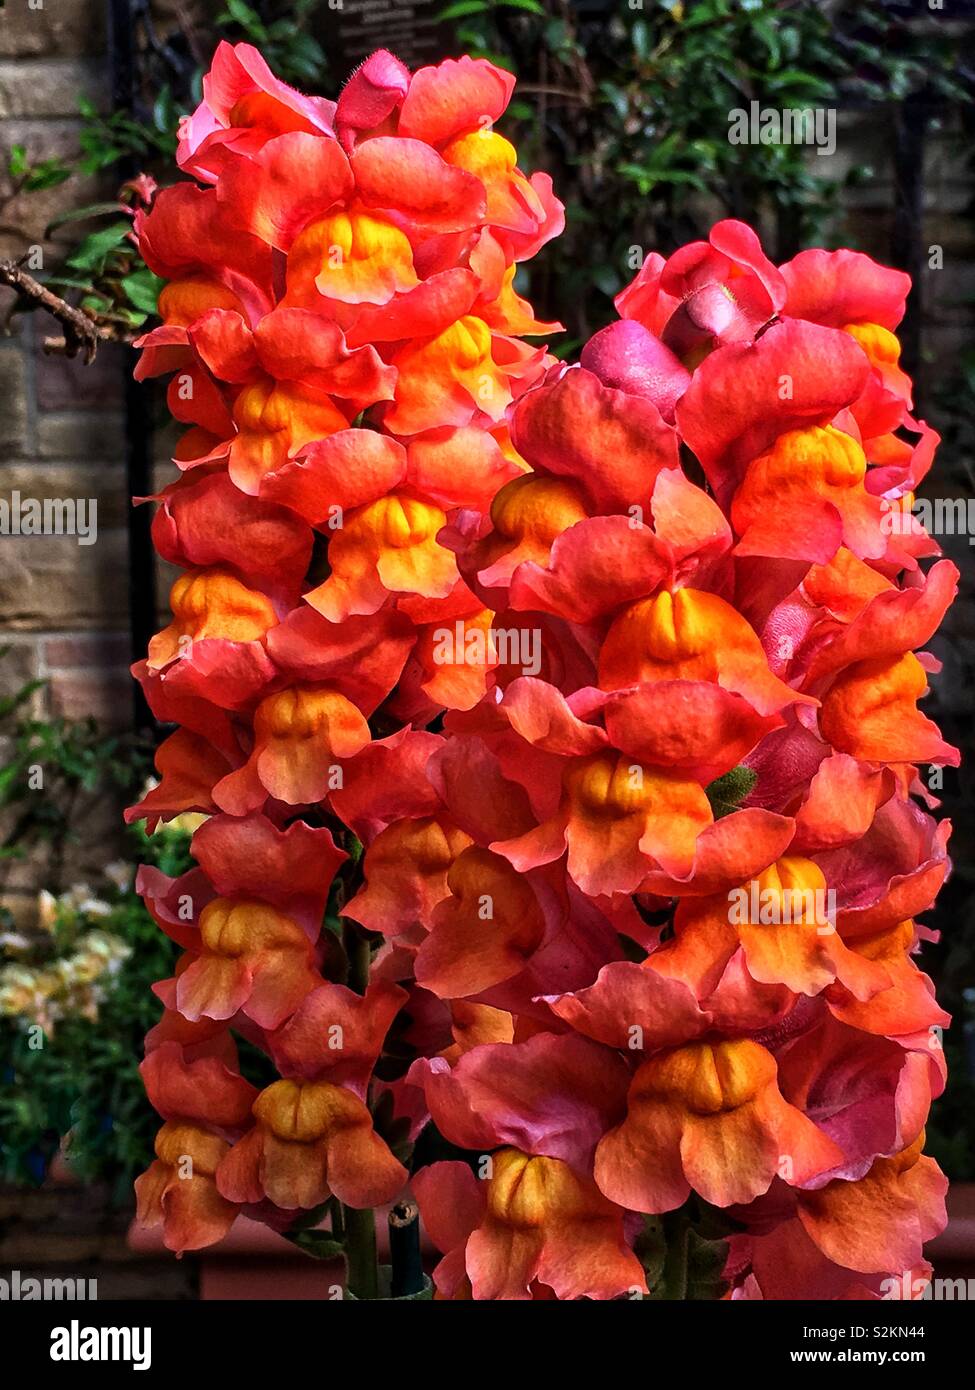 Colorful Matthiola incana flower, aka evening stock and night-scented stock, with bright red, orange, and pink flowers. Stock Photo